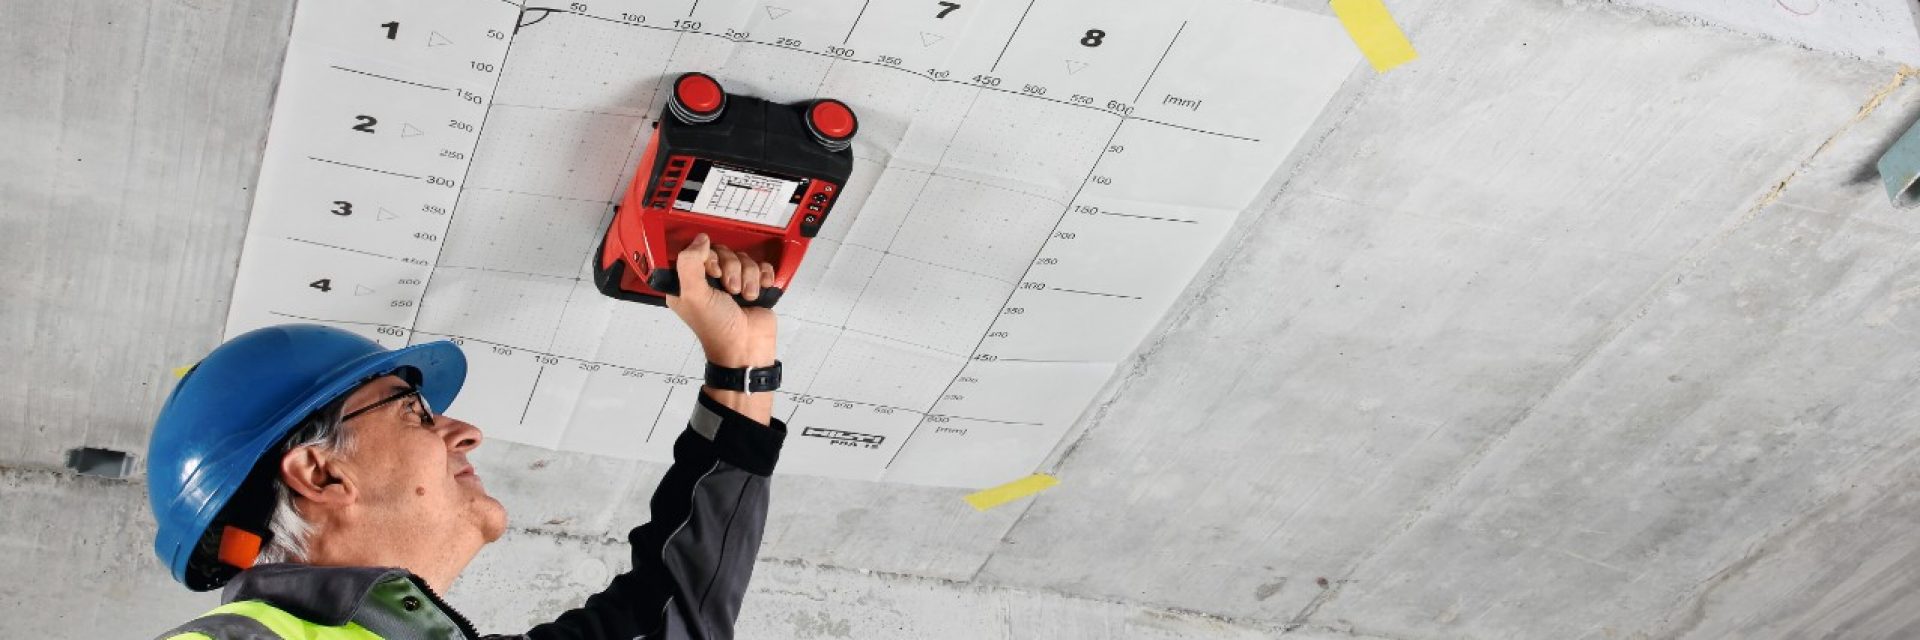 Hilti concrete scanner finding post-tensioning tendons in Pune, India